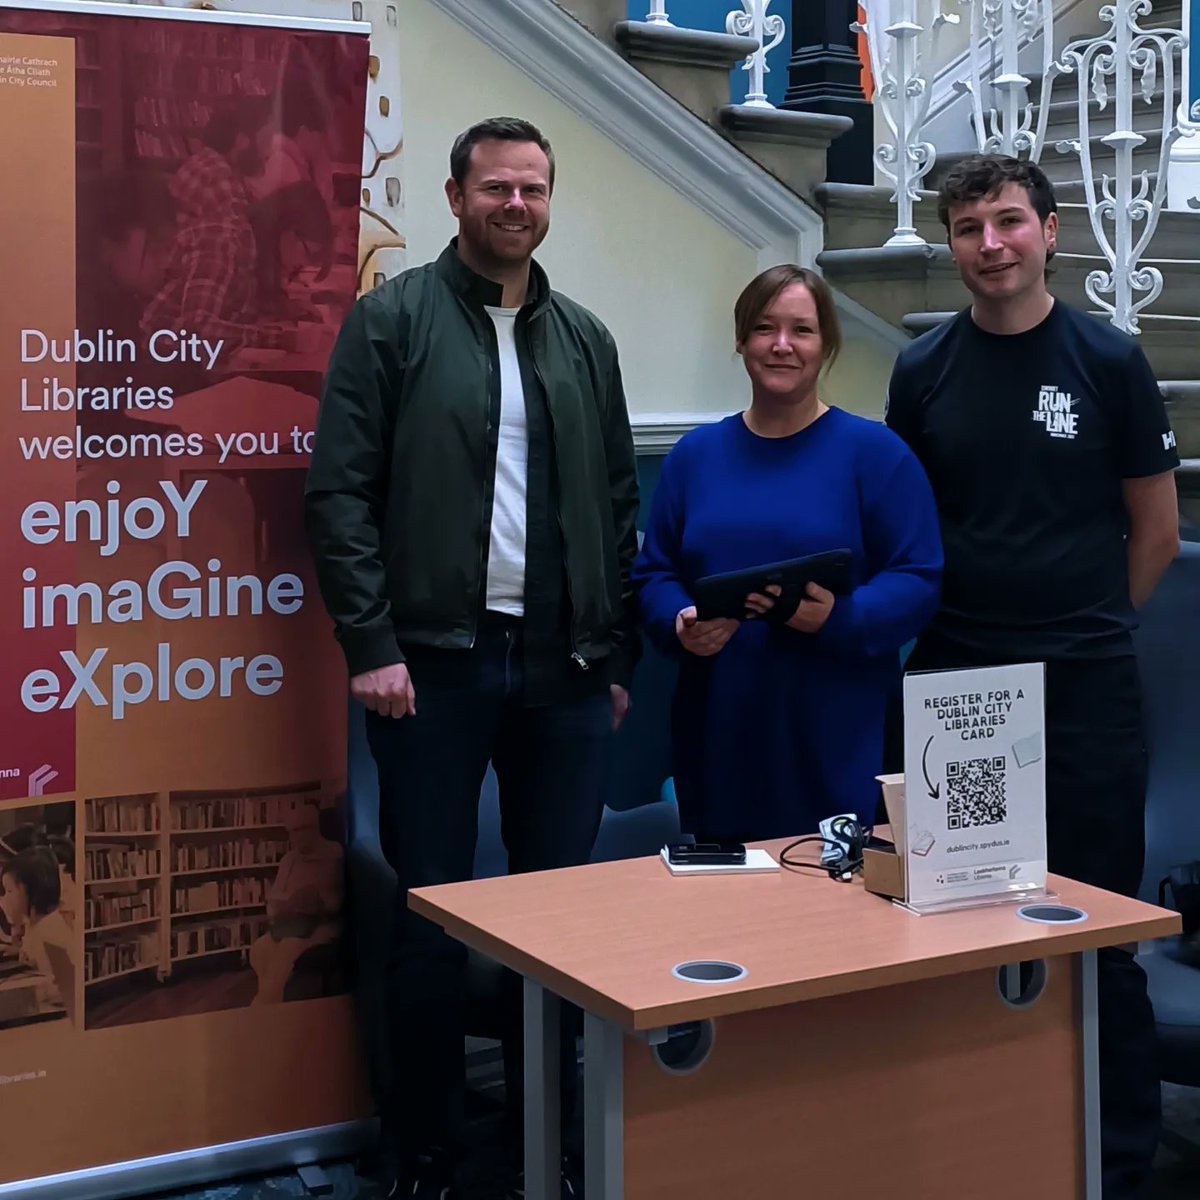 Register for a Dublin City libraries card in @RathminesCFE  today. 

No documentation needed. @RathminesCFE student card is all you need! 🙌 📚
#enjoyimagineexplore

Don't miss out!! In the foyer today! Come & chat to Amanda & Shane. 🗣️ #dublincitylibraries #libraryinthecommunity